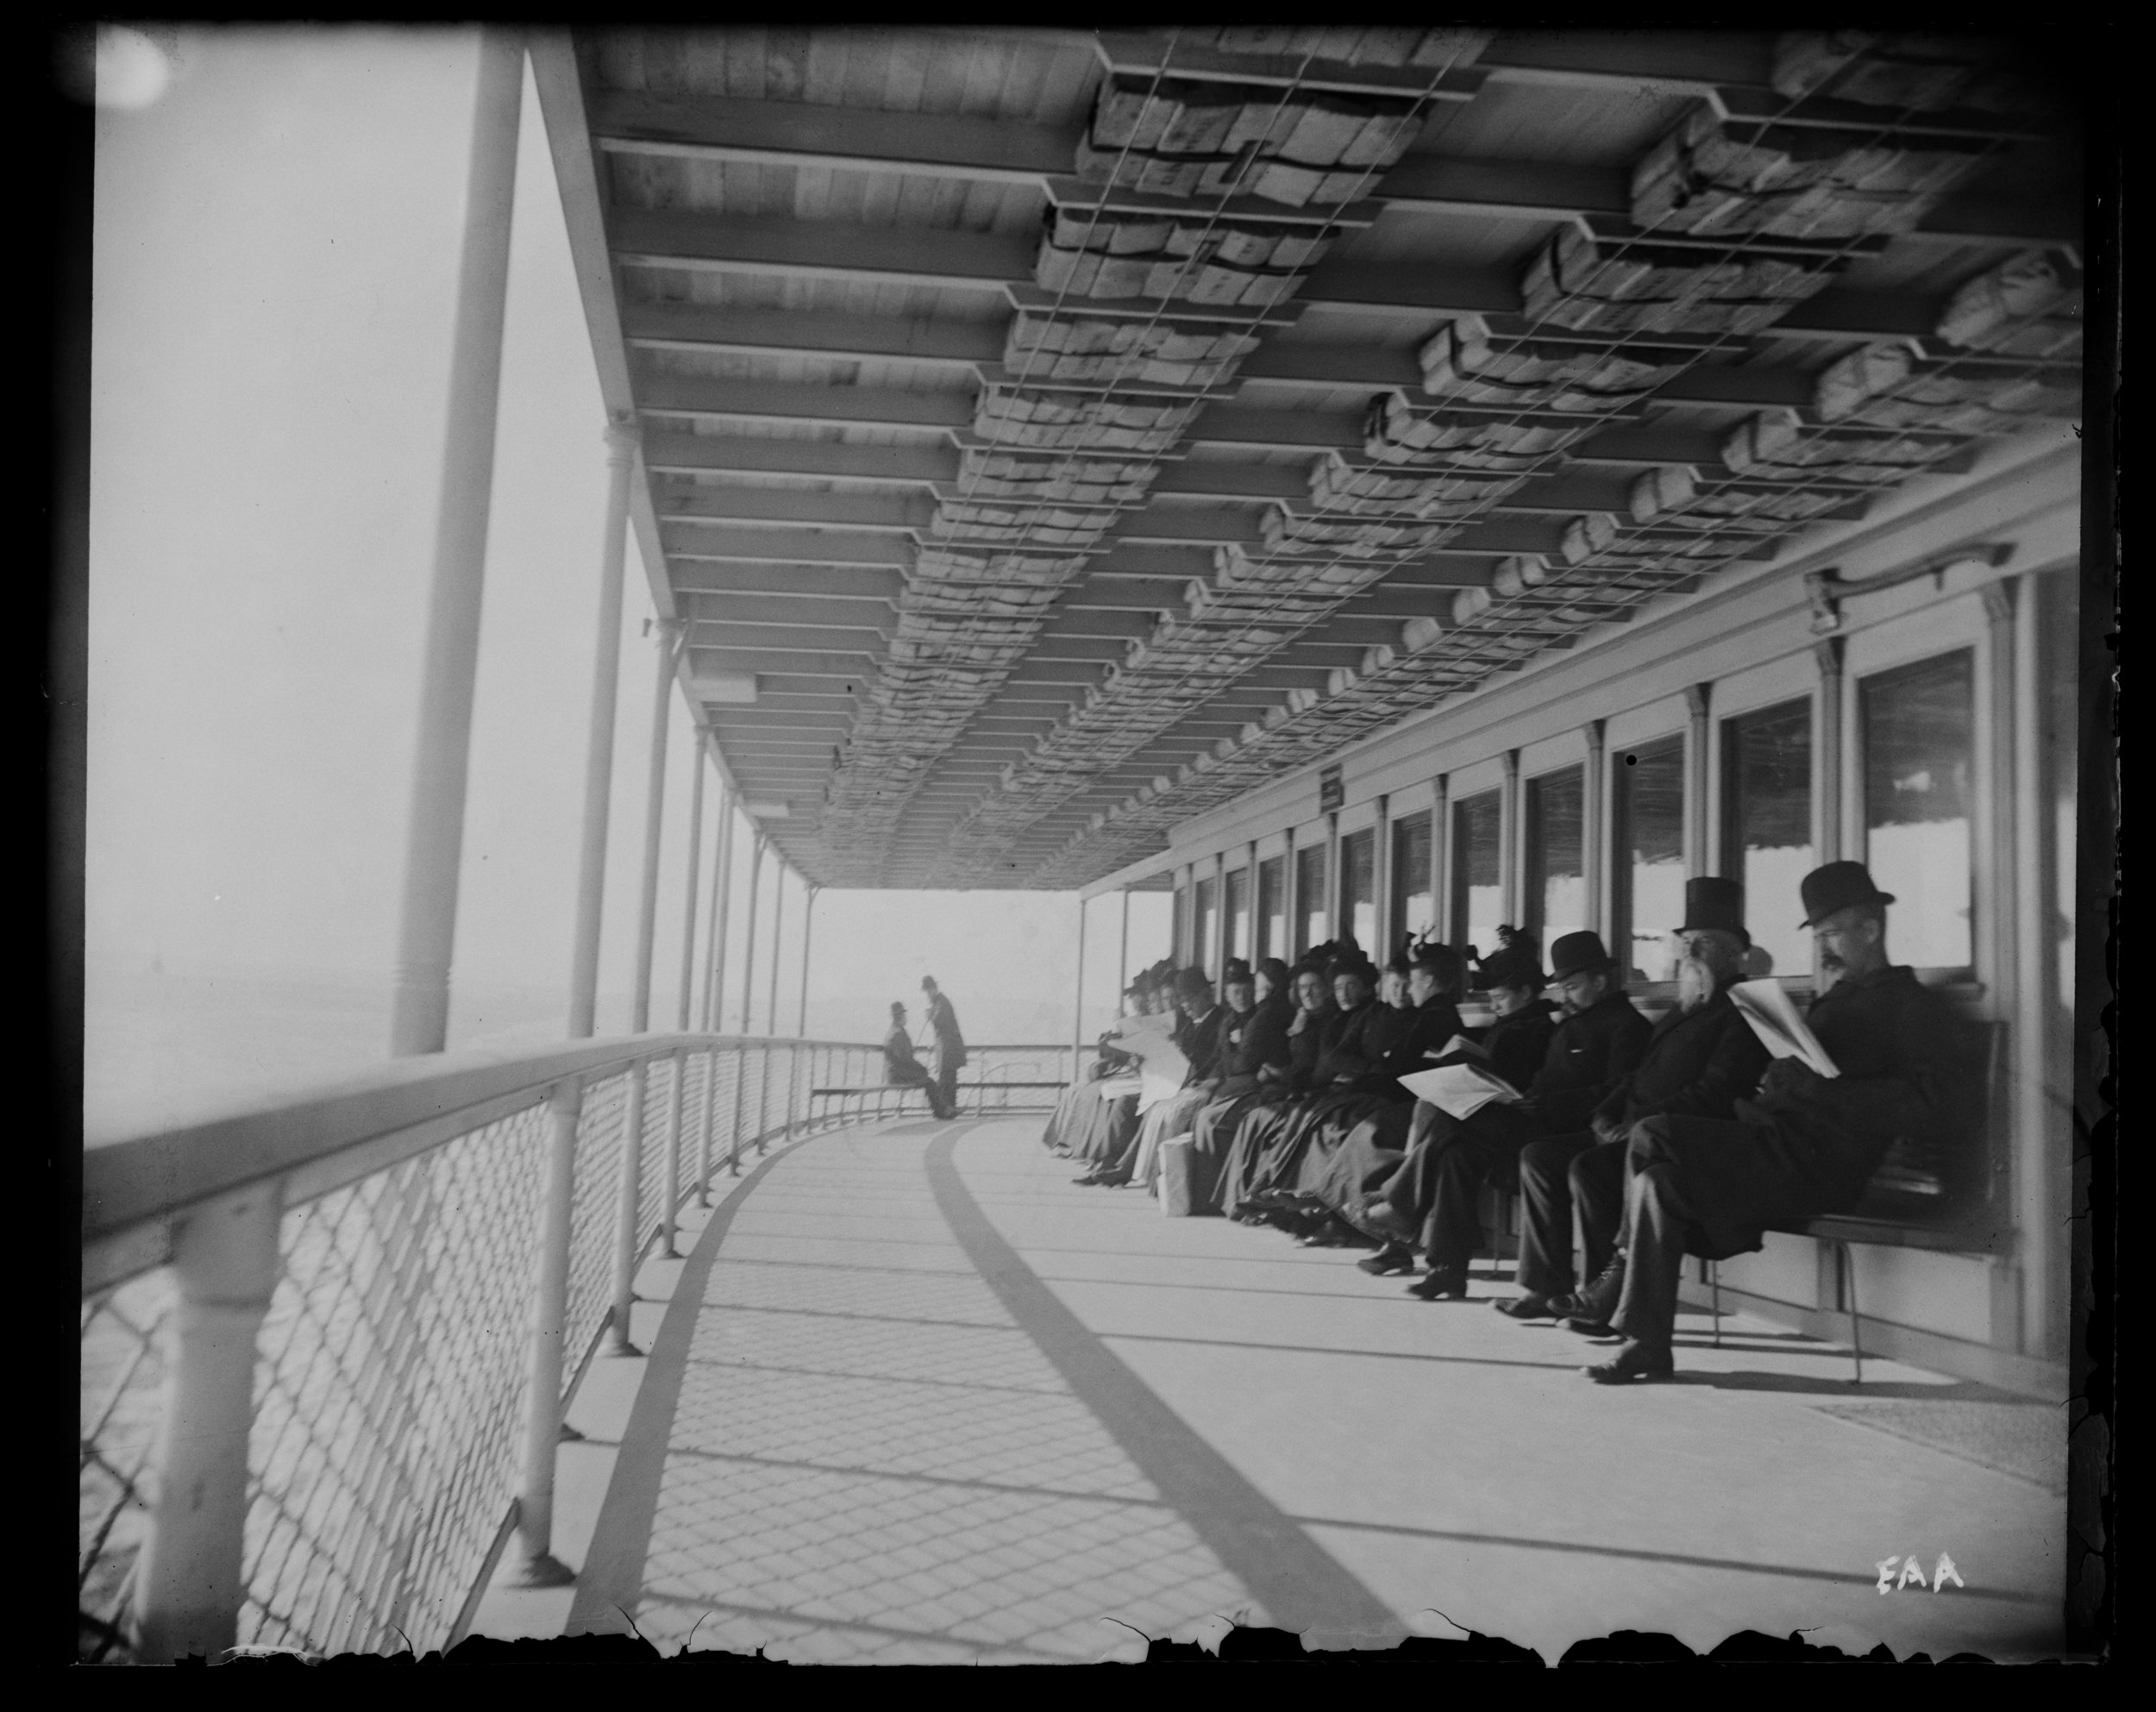 “Part of our ferry boat deck,” Staten Island Ferry, November 17, 1890